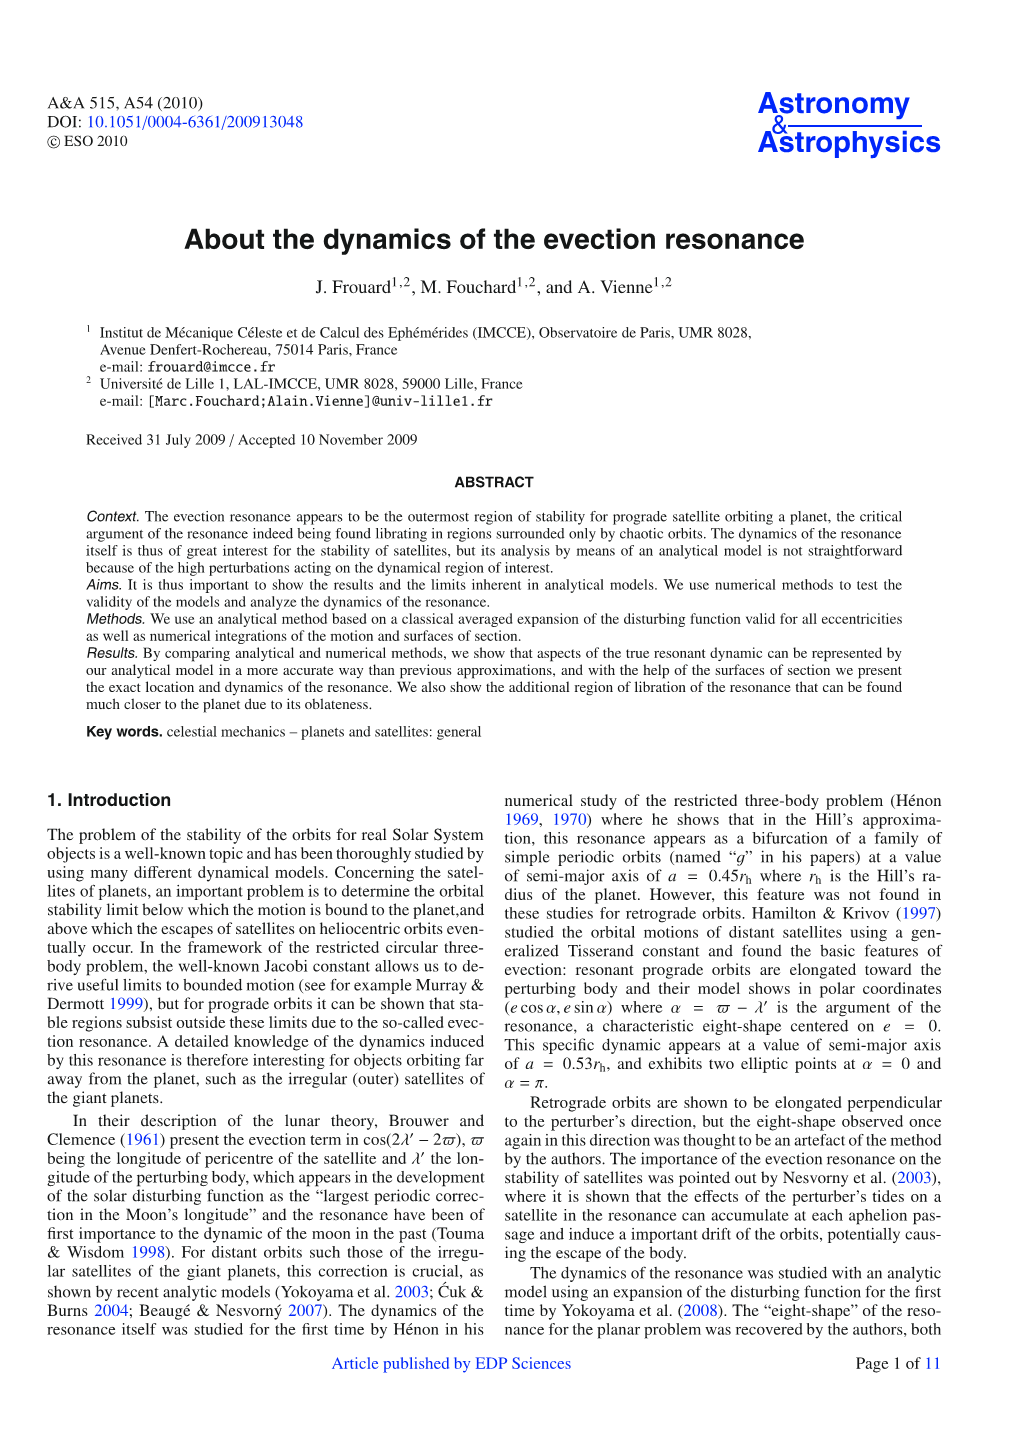 About the Dynamics of the Evection Resonance